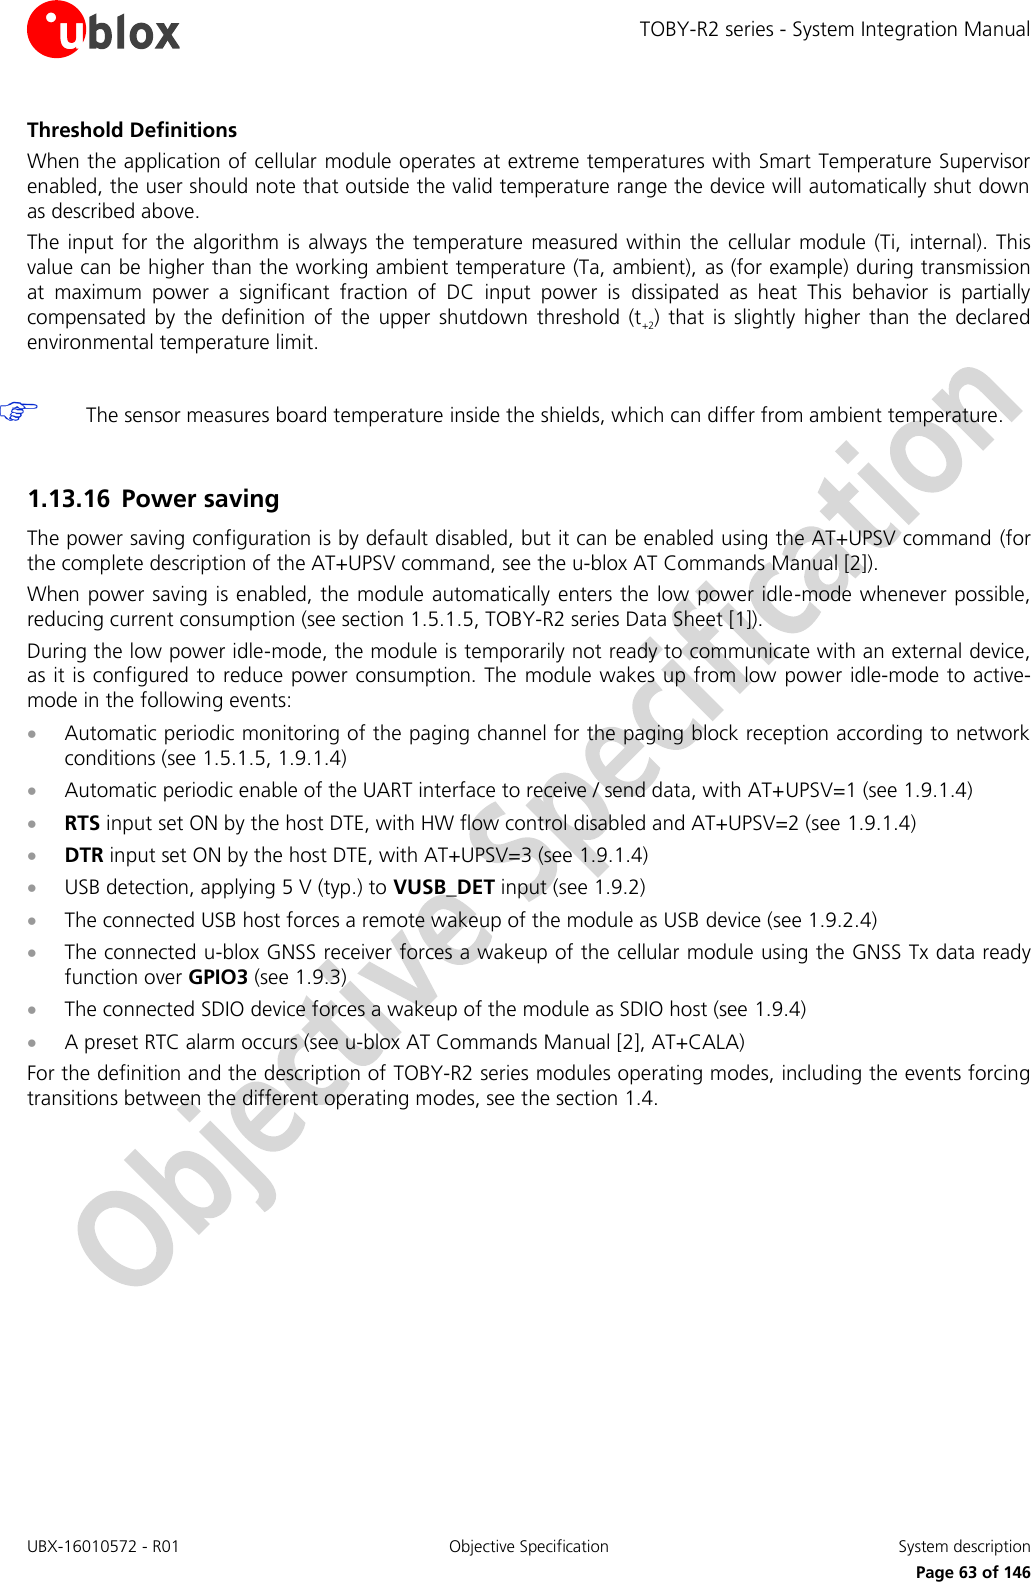 TOBY-R2 series - System Integration Manual UBX-16010572 - R01  Objective Specification  System description     Page 63 of 146 Threshold Definitions When the application of cellular module operates at extreme temperatures with Smart Temperature Supervisor enabled, the user should note that outside the valid temperature range the device will automatically shut down as described above. The  input  for the  algorithm  is always  the  temperature  measured within  the  cellular  module (Ti,  internal). This value can be higher than the working ambient temperature (Ta, ambient),  as (for example) during transmission at  maximum  power  a  significant  fraction  of  DC  input  power  is  dissipated  as  heat  This  behavior  is  partially compensated  by  the  definition  of  the  upper shutdown  threshold  (t+2)  that  is slightly  higher  than  the  declared environmental temperature limit.   The sensor measures board temperature inside the shields, which can differ from ambient temperature.  1.13.16 Power saving The power saving configuration is by default disabled, but it can be enabled using the AT+UPSV command (for the complete description of the AT+UPSV command, see the u-blox AT Commands Manual [2]). When power saving is enabled, the module automatically enters the low power idle-mode whenever possible, reducing current consumption (see section 1.5.1.5, TOBY-R2 series Data Sheet [1]). During the low power idle-mode, the module is temporarily not ready to communicate with an external device, as it is configured to reduce power consumption. The module wakes up from  low power idle-mode to active-mode in the following events:  Automatic periodic monitoring of the paging channel for the paging block reception according to network conditions (see 1.5.1.5, 1.9.1.4)  Automatic periodic enable of the UART interface to receive / send data, with AT+UPSV=1 (see 1.9.1.4)   RTS input set ON by the host DTE, with HW flow control disabled and AT+UPSV=2 (see 1.9.1.4)   DTR input set ON by the host DTE, with AT+UPSV=3 (see 1.9.1.4)   USB detection, applying 5 V (typ.) to VUSB_DET input (see 1.9.2)  The connected USB host forces a remote wakeup of the module as USB device (see 1.9.2.4)  The connected u-blox GNSS receiver forces a wakeup of the cellular module using the GNSS Tx data ready function over GPIO3 (see 1.9.3)  The connected SDIO device forces a wakeup of the module as SDIO host (see 1.9.4)  A preset RTC alarm occurs (see u-blox AT Commands Manual [2], AT+CALA) For the definition and the description of TOBY-R2 series modules operating modes, including the events forcing transitions between the different operating modes, see the section 1.4. 